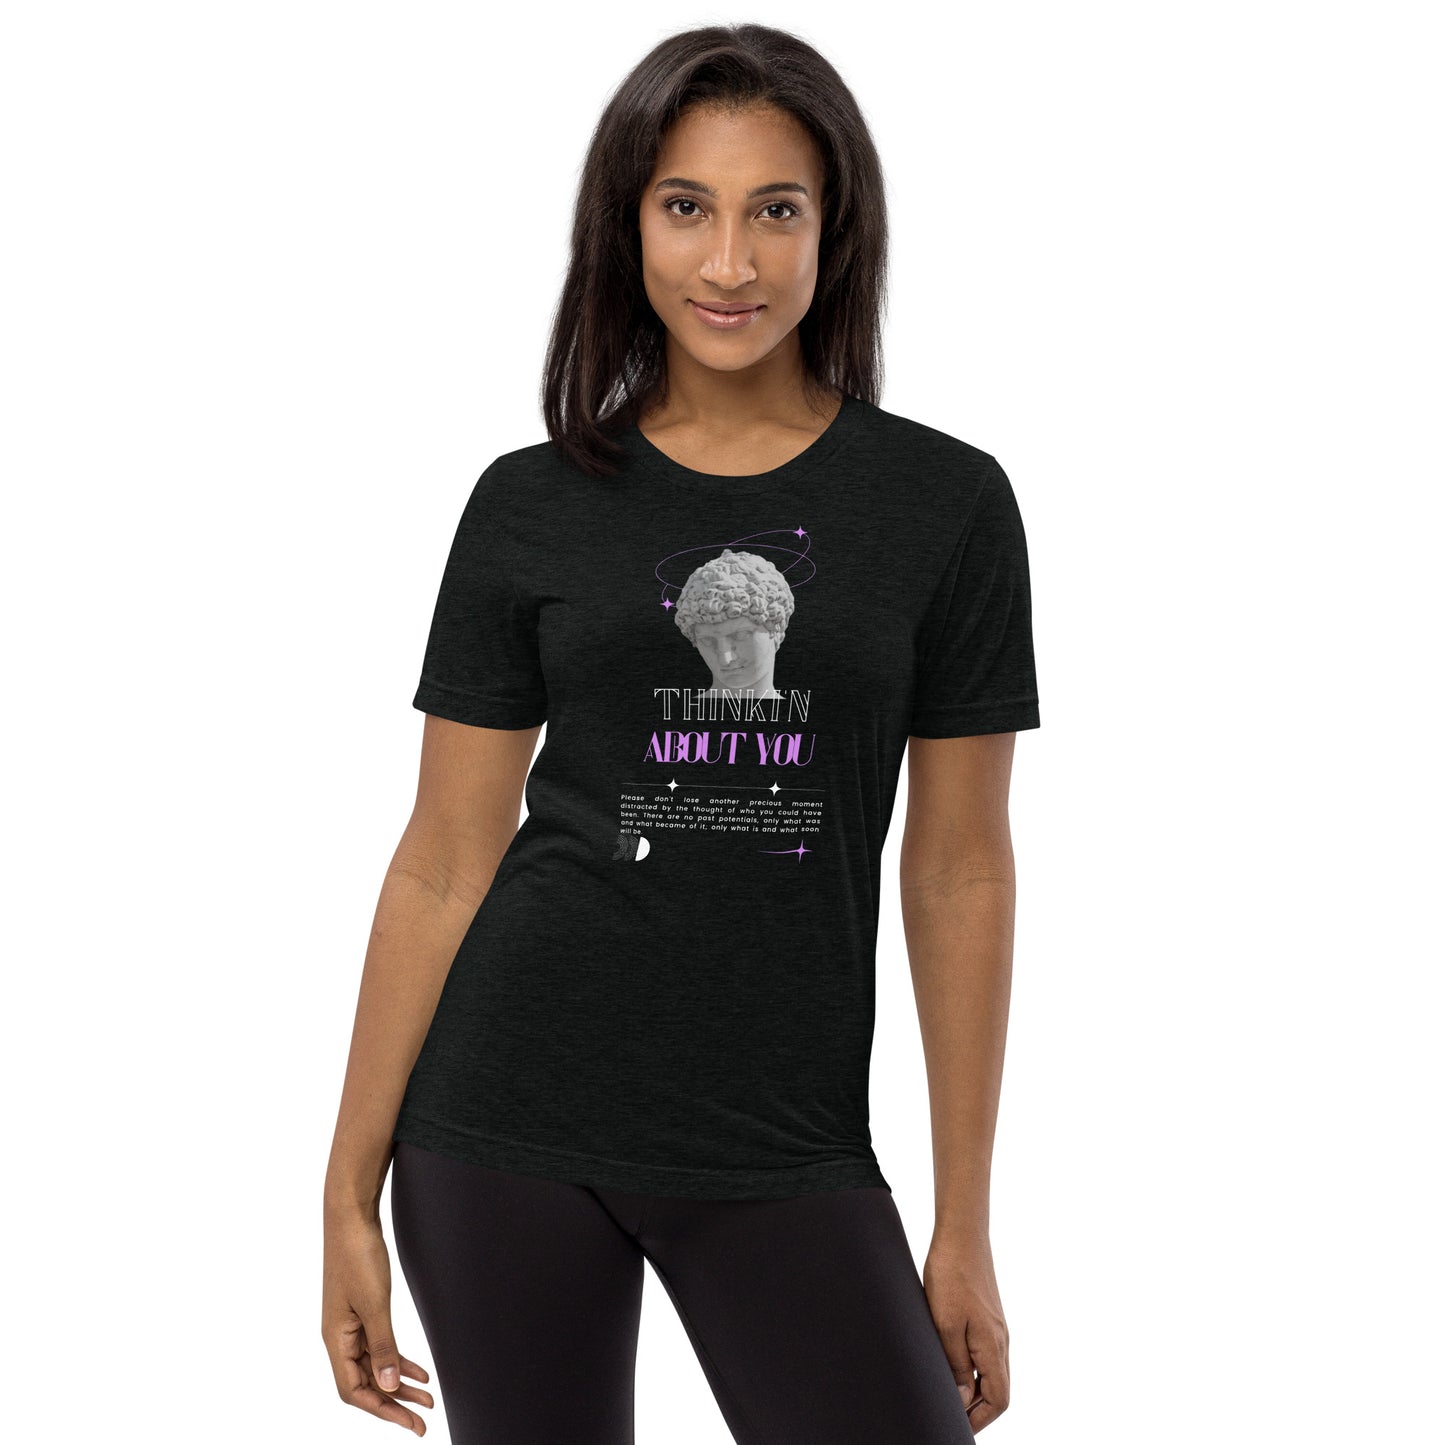 Mindfully Thinki'n About You T-shirt